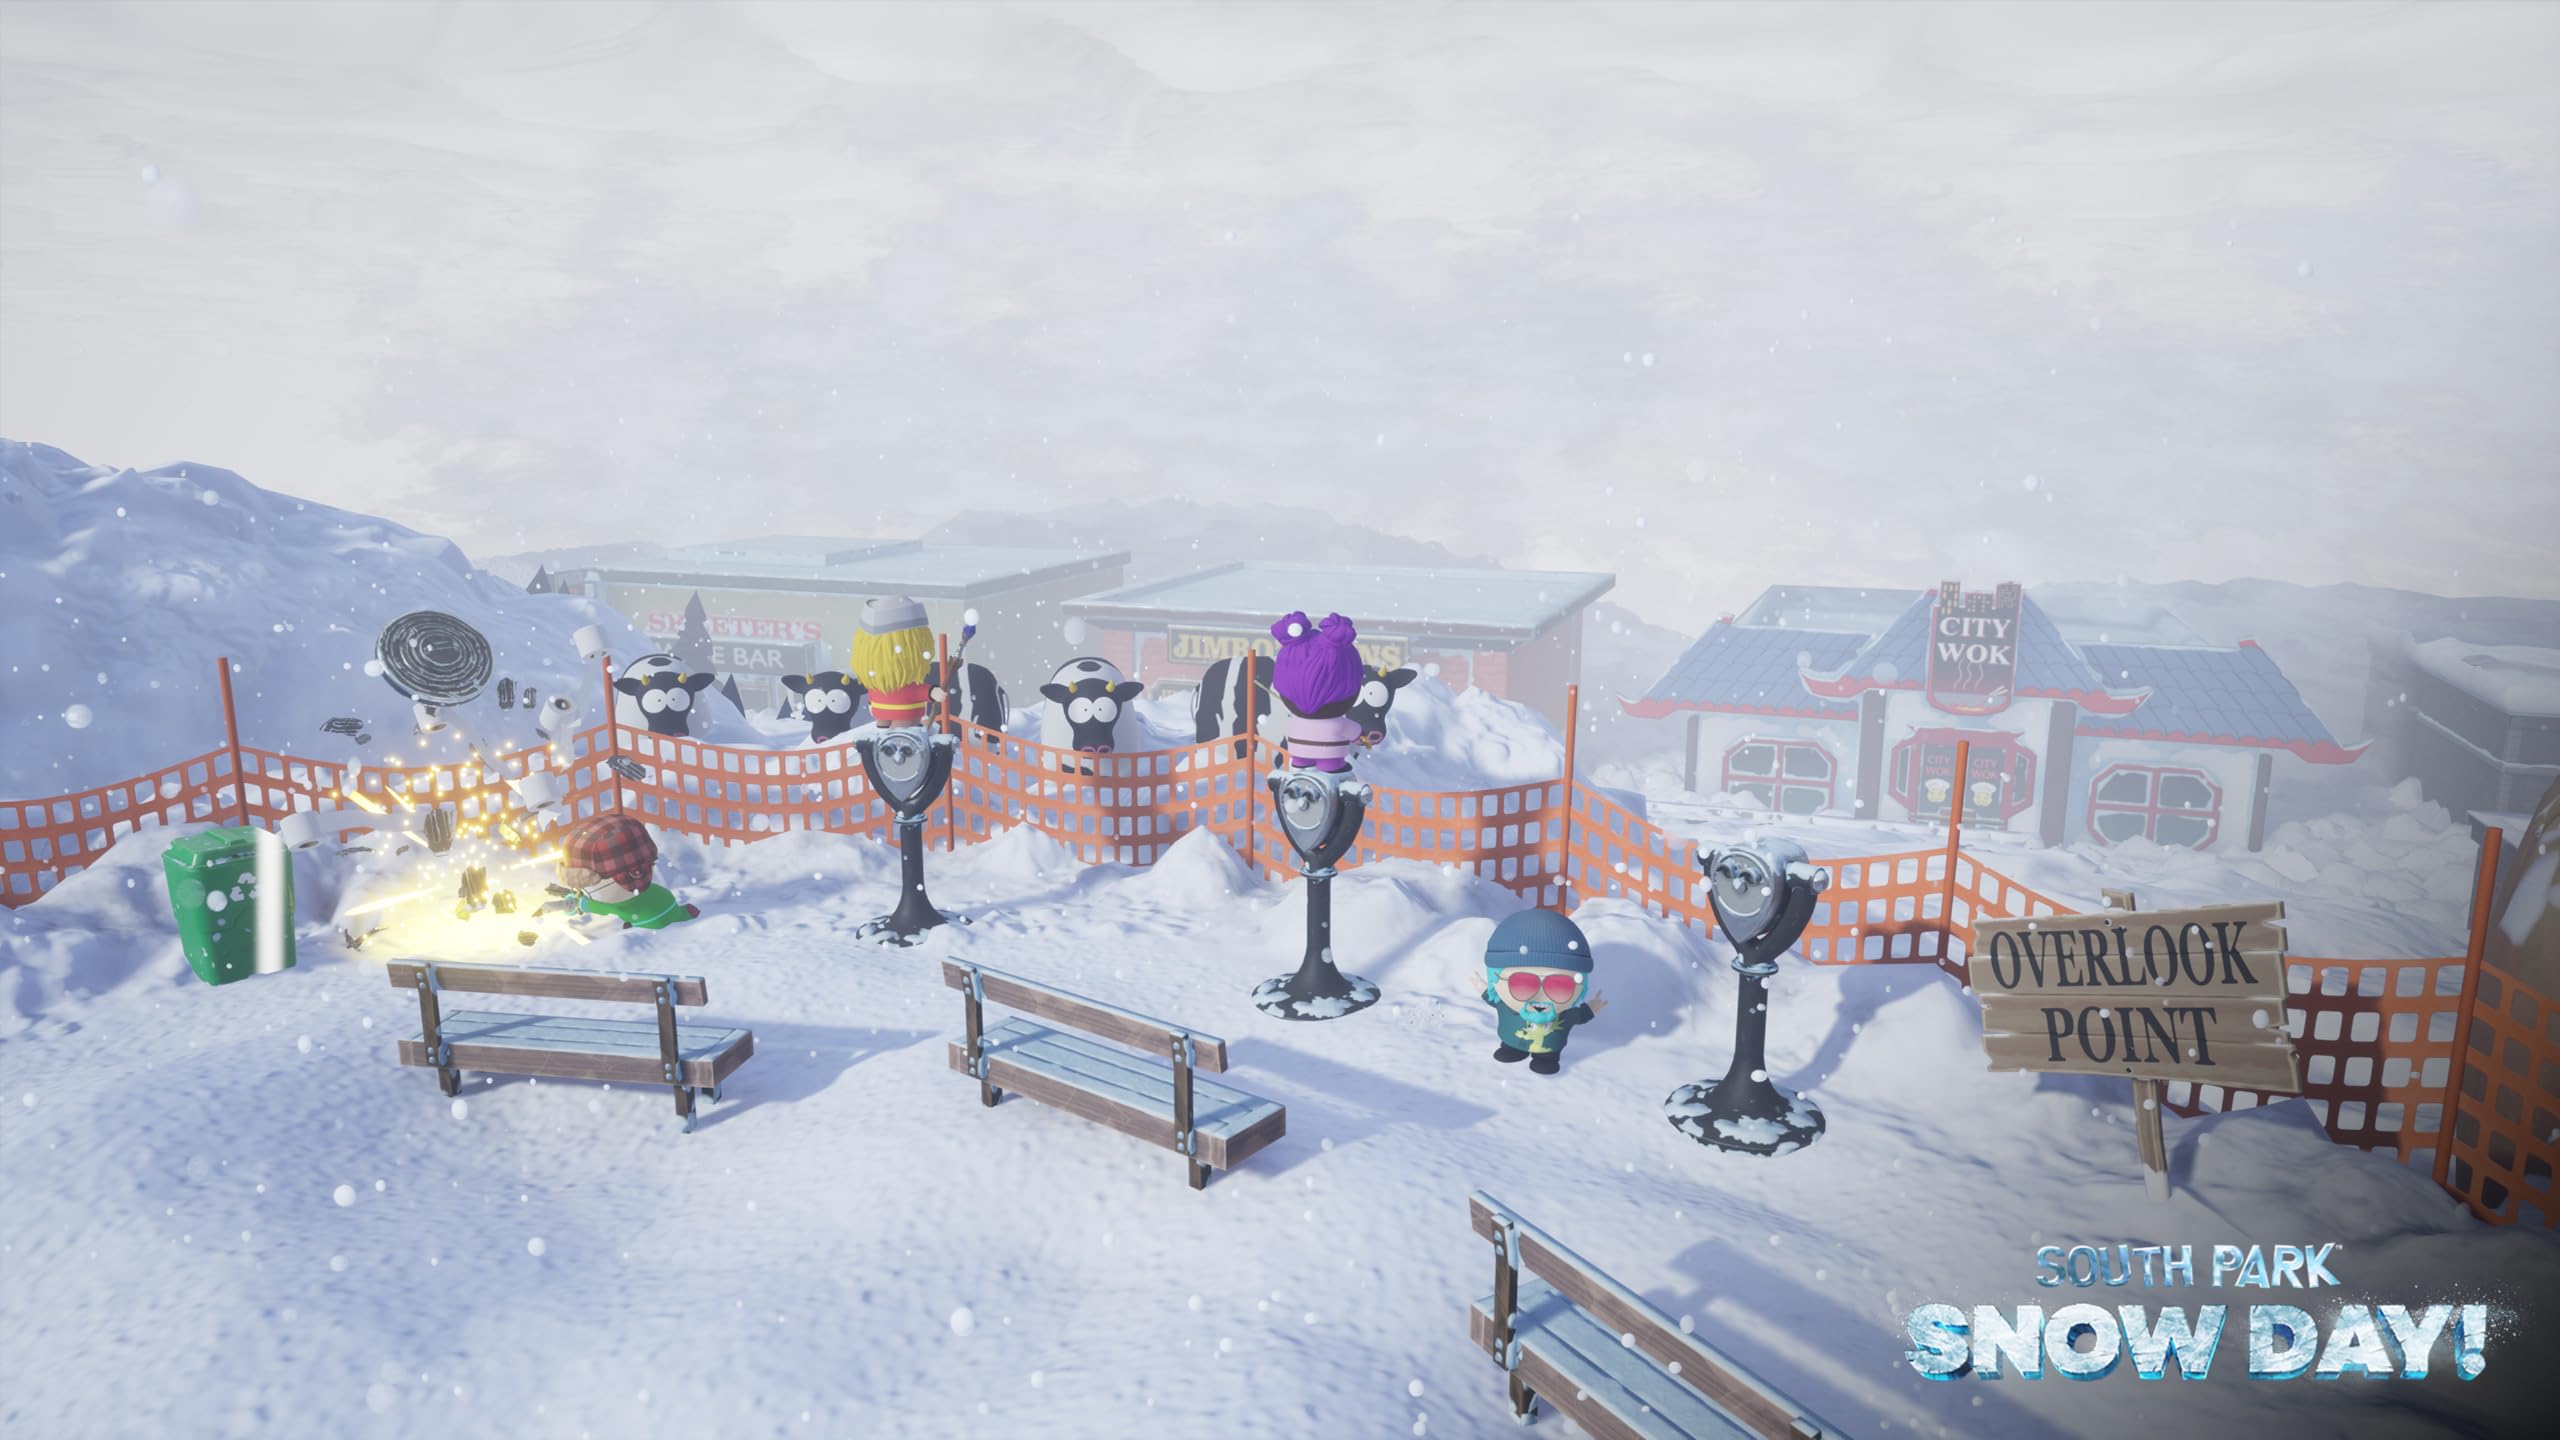 South Park: Snow Day! - (PS5) Playstation 5